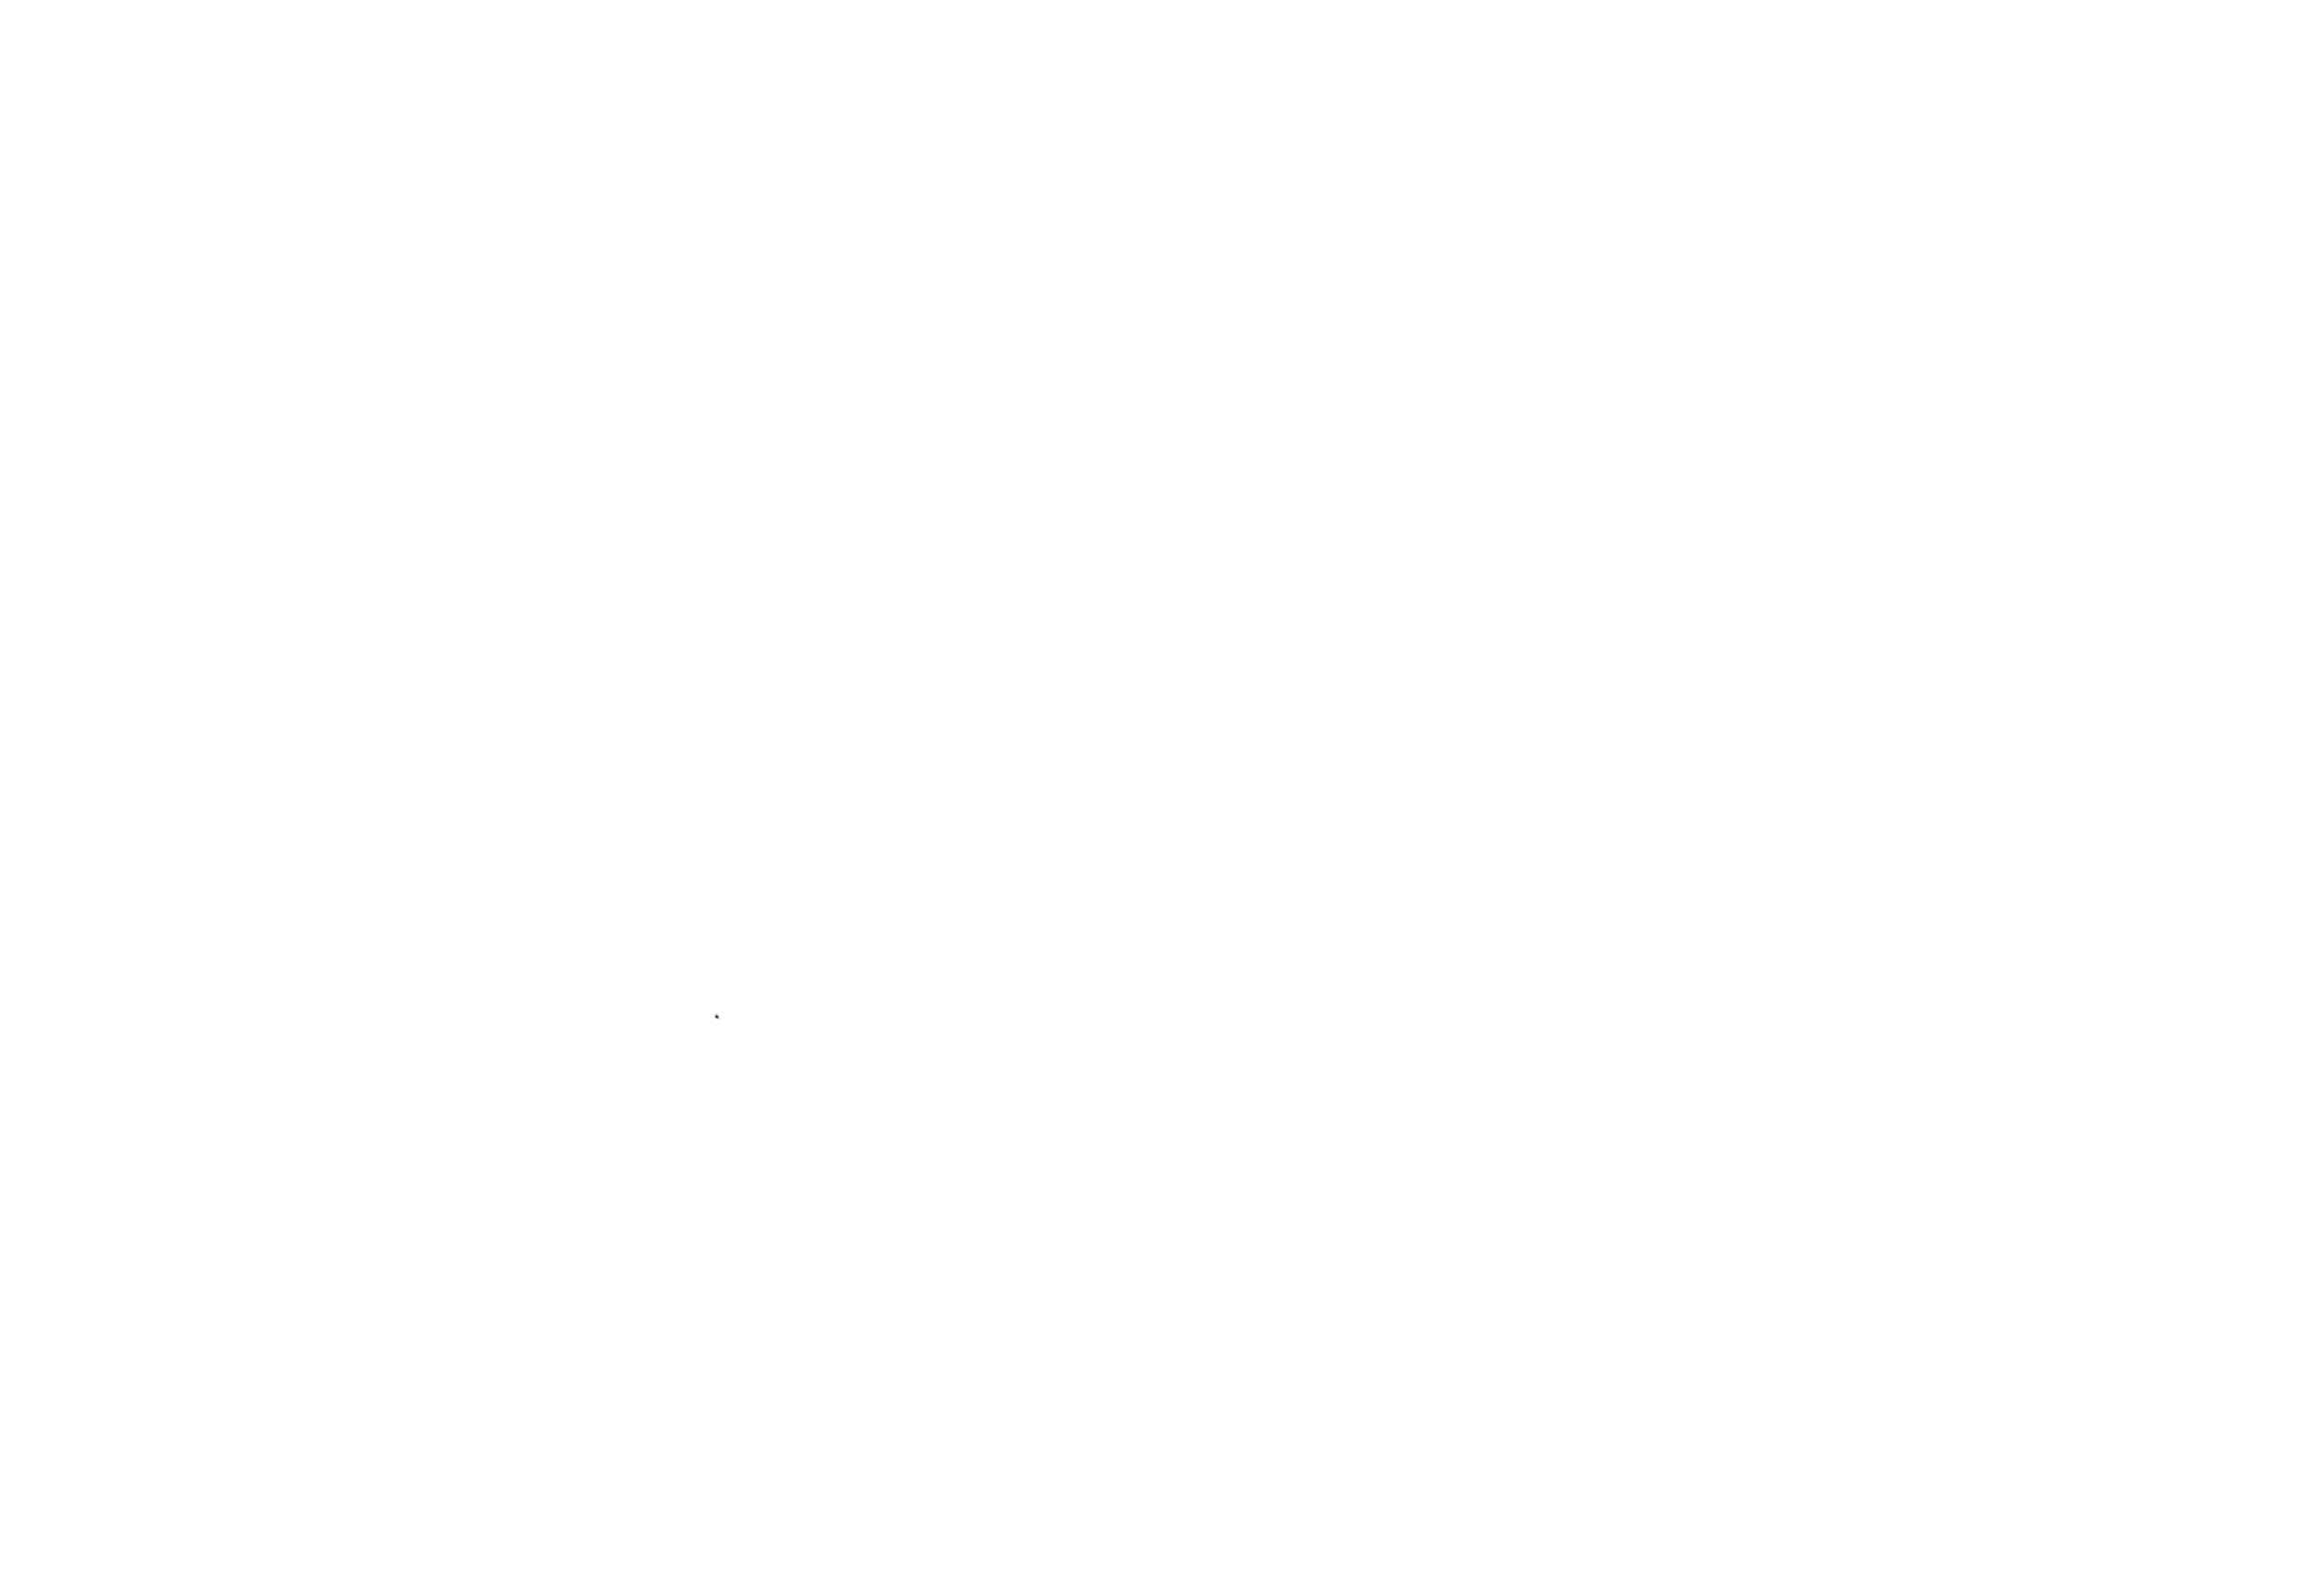 Lift Off Sessions 2019 white Finalist